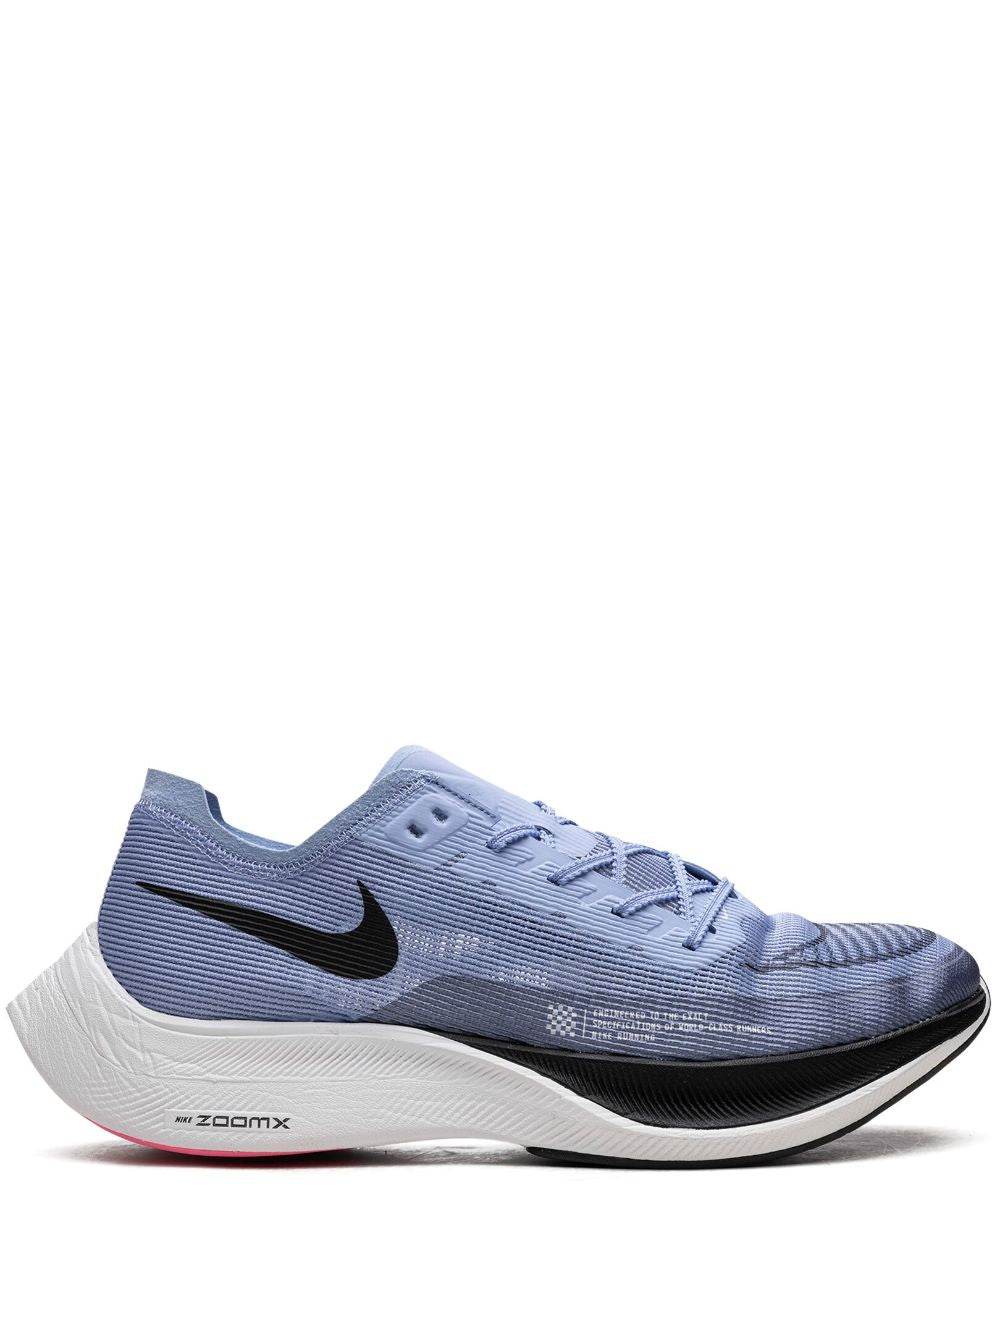 Nike ZoomX Vaporfly Next% 2 "Cobalt Bliss" sneakers